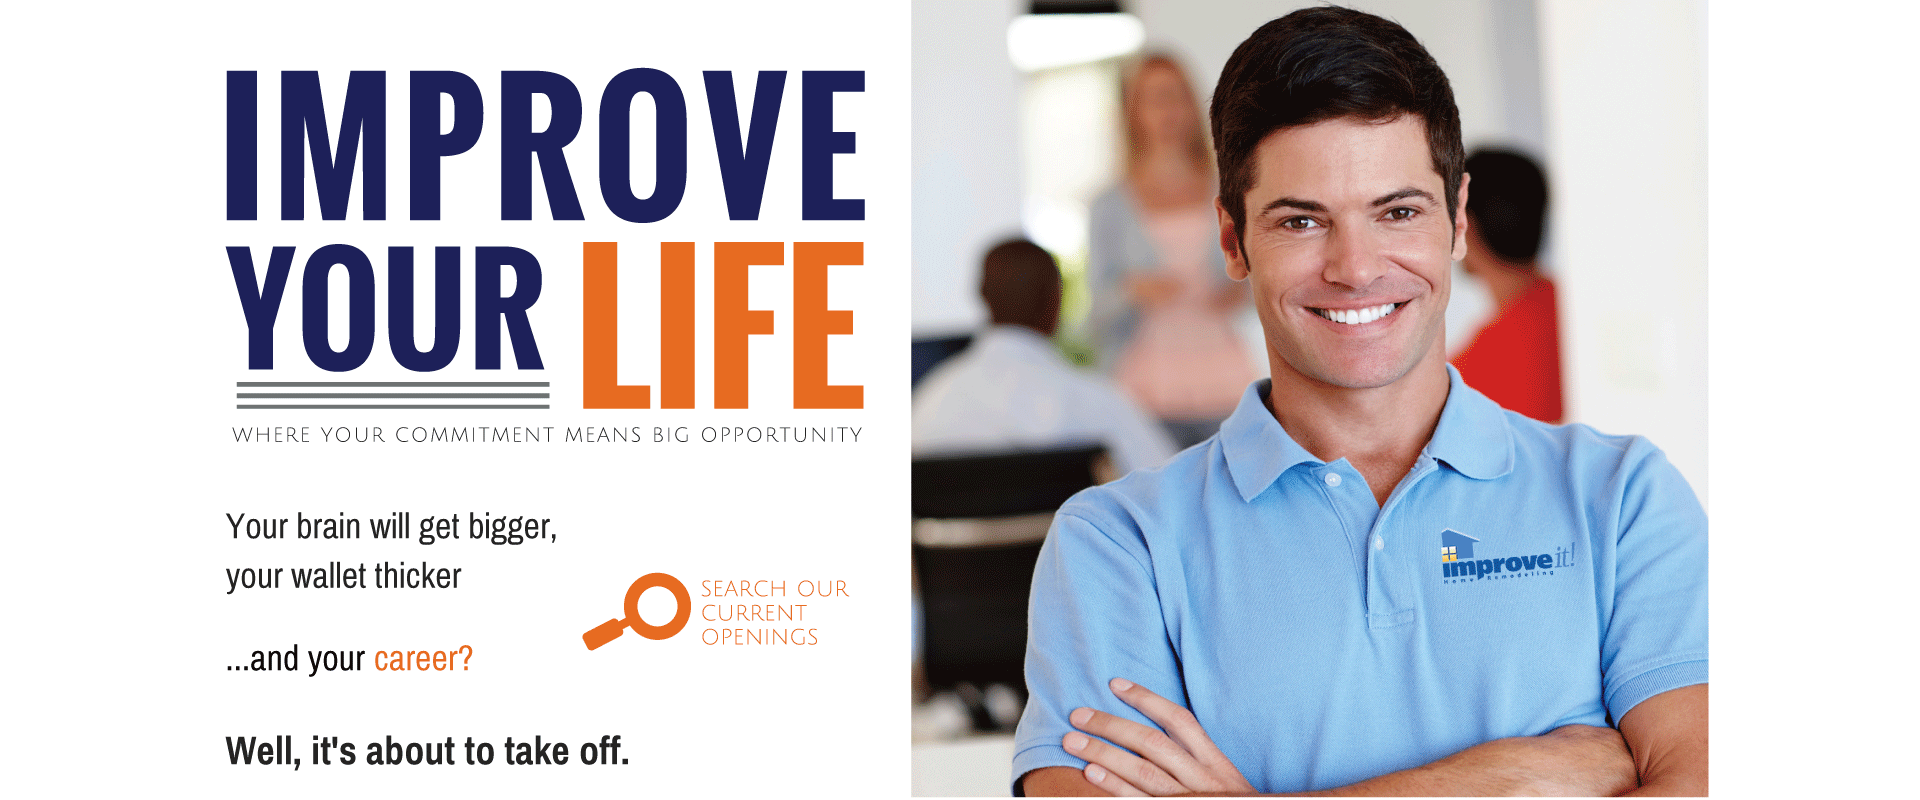 Improve your life with a marketing or sales career at Improveit.